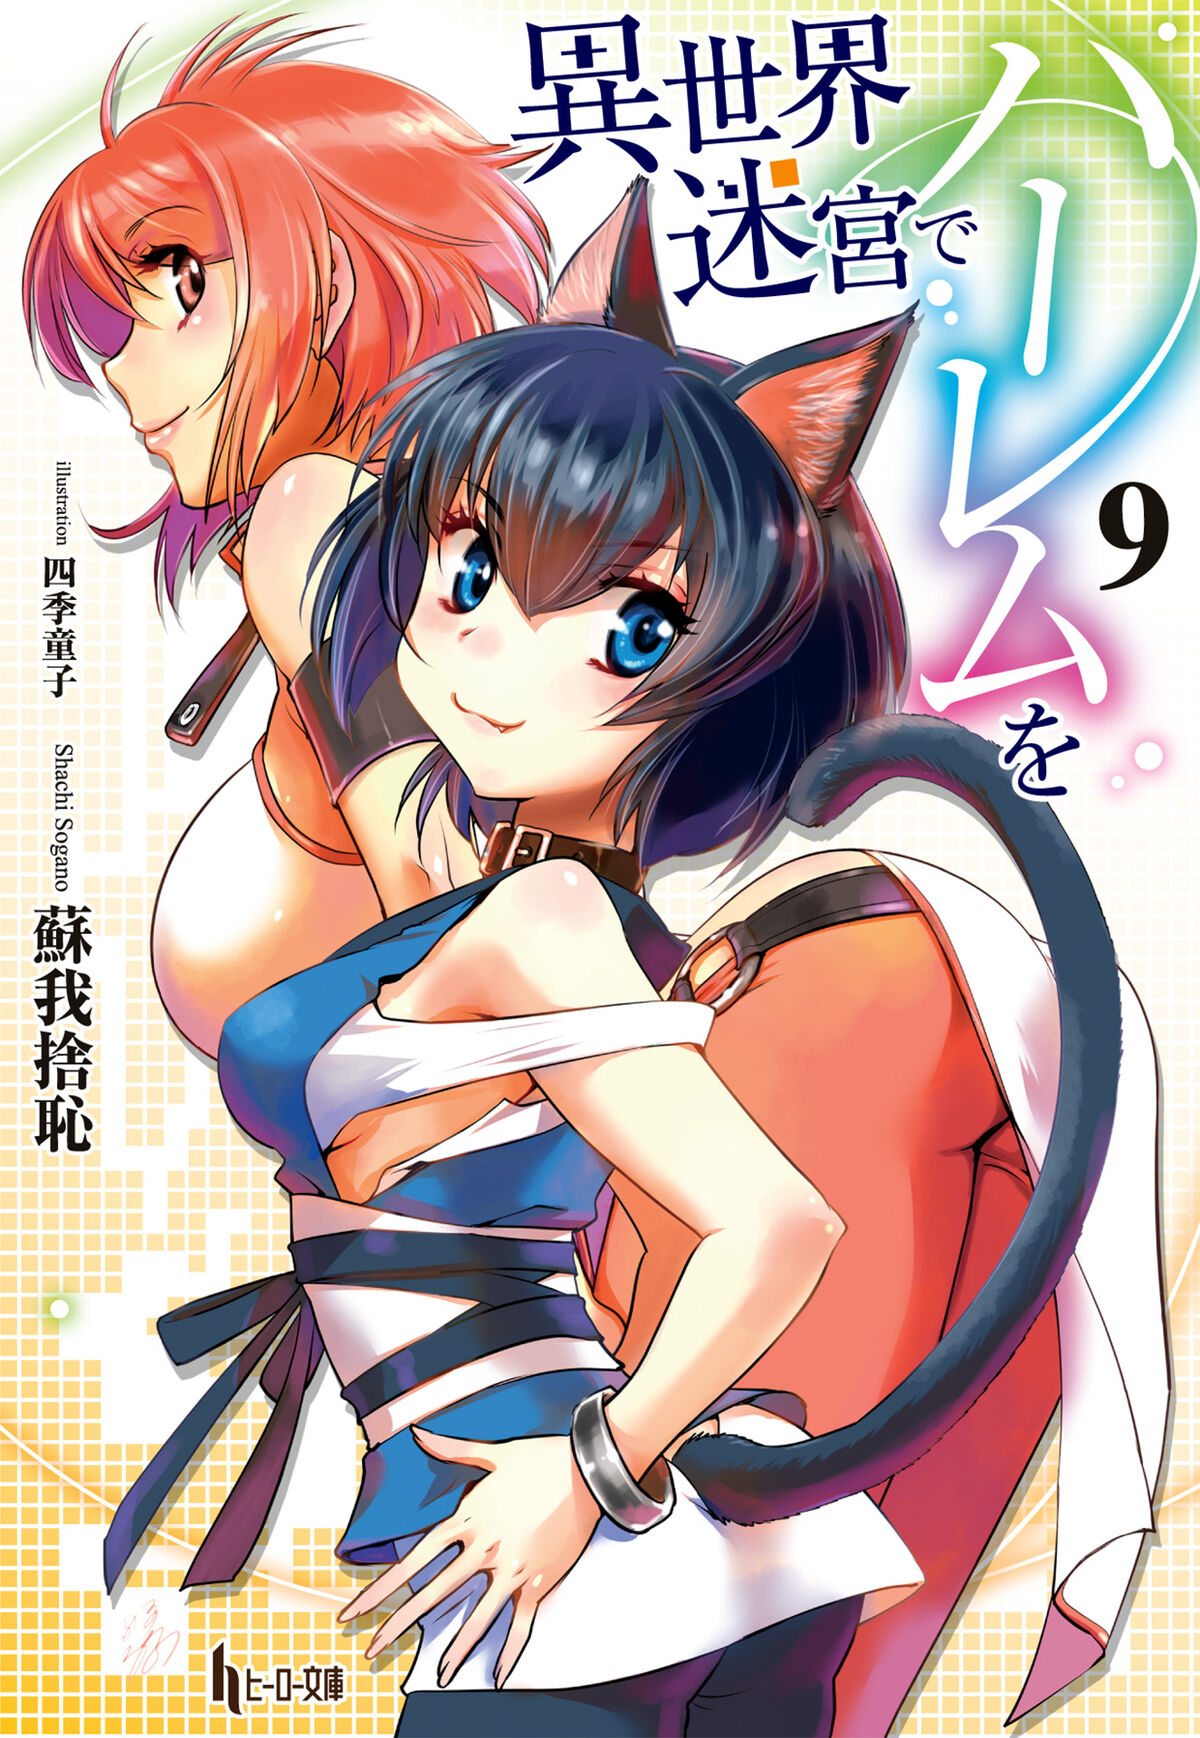 Harem in the Labyrinth of Another World LN Volume 4 